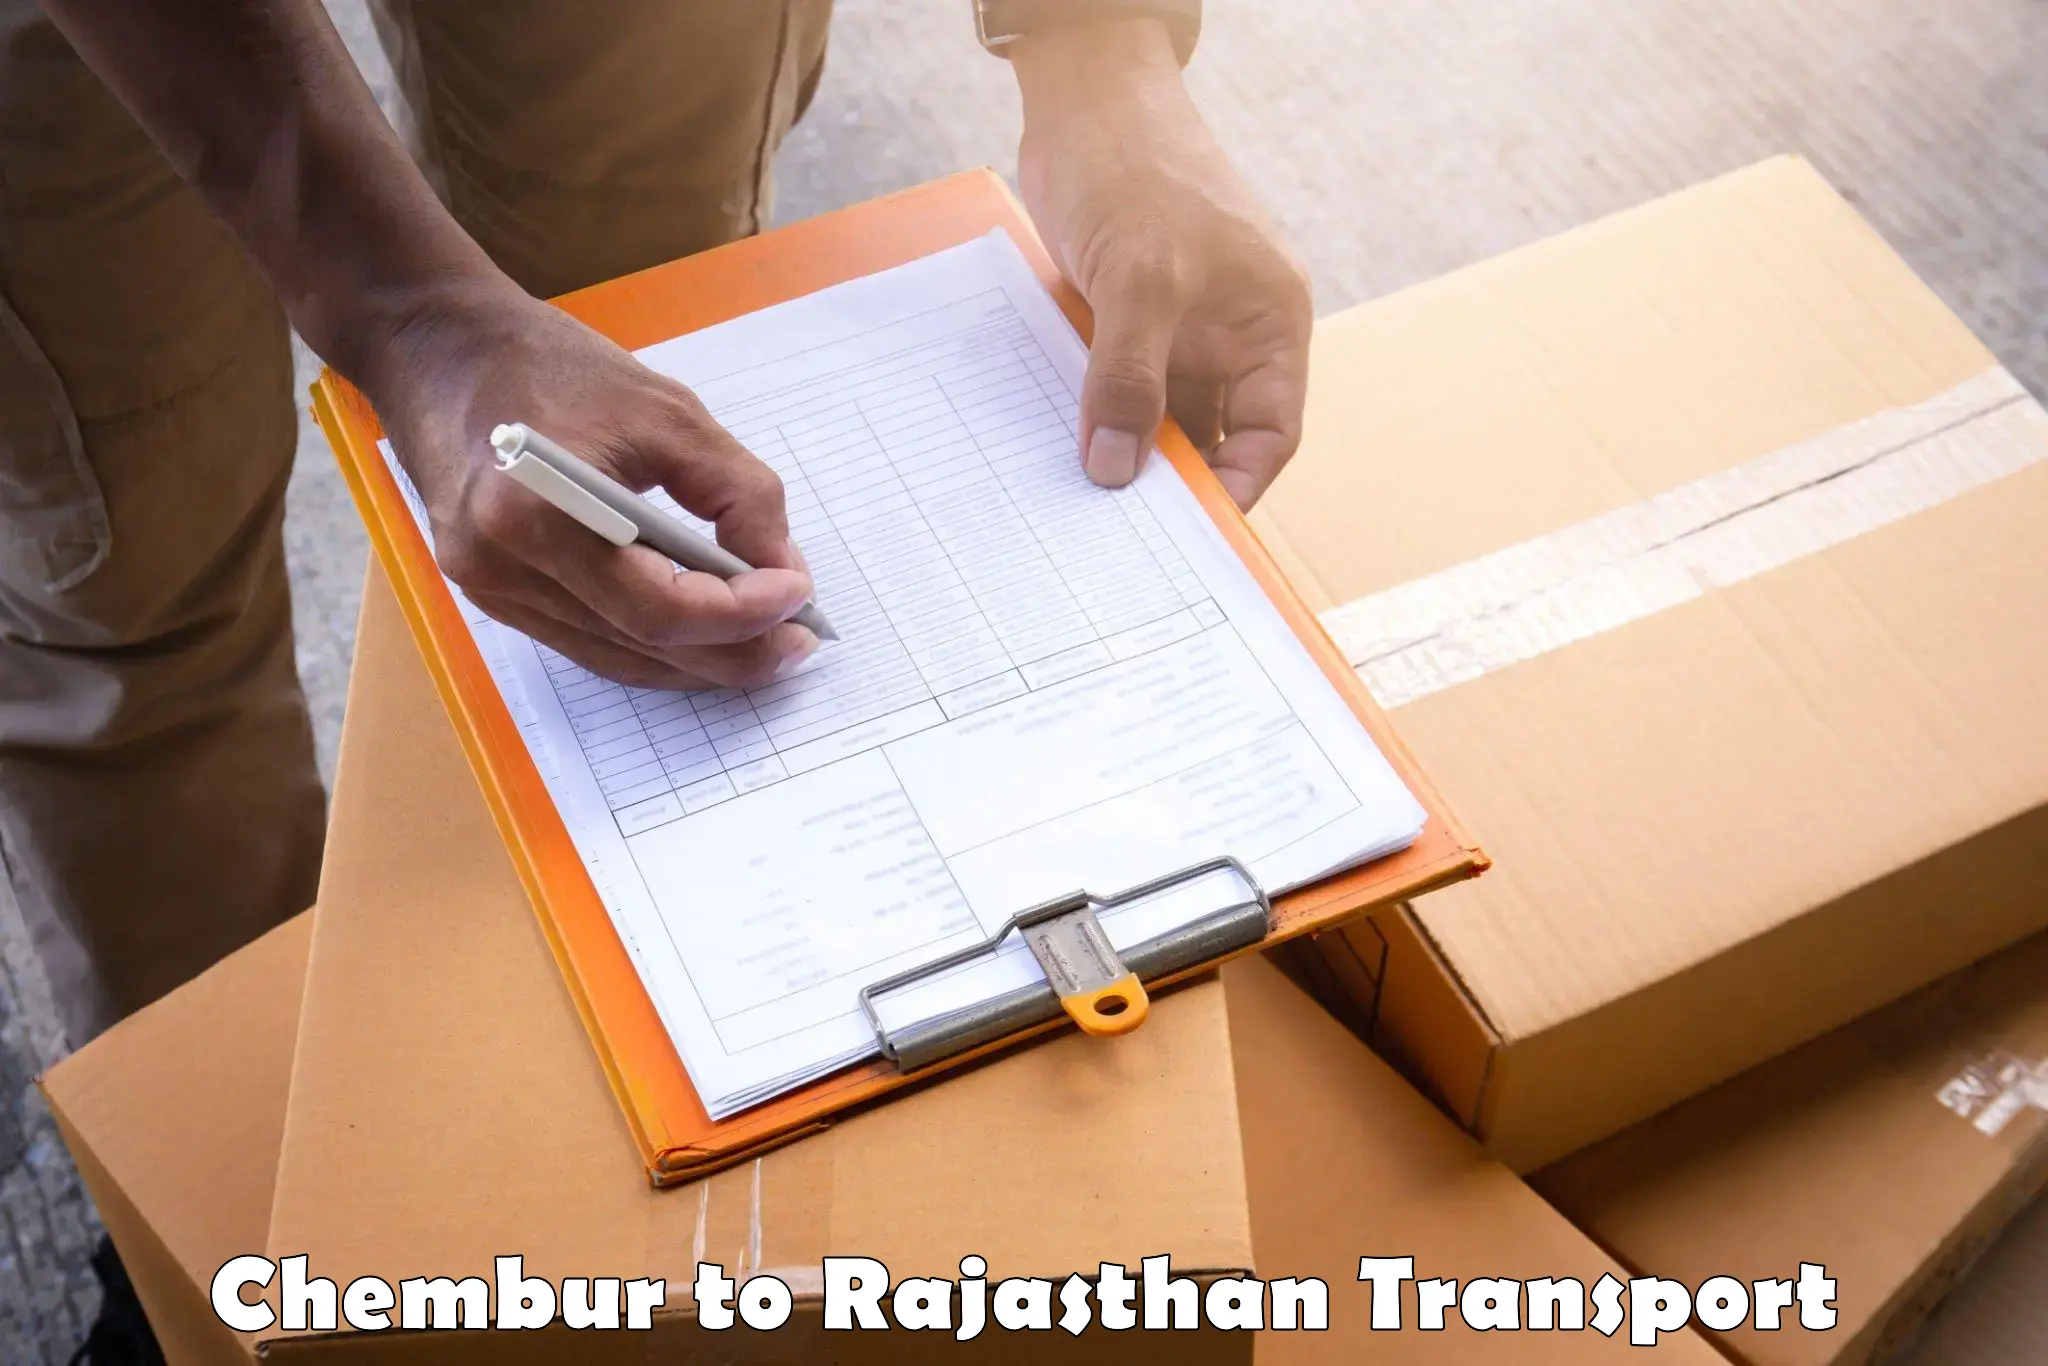 Goods delivery service Chembur to Rajasthan